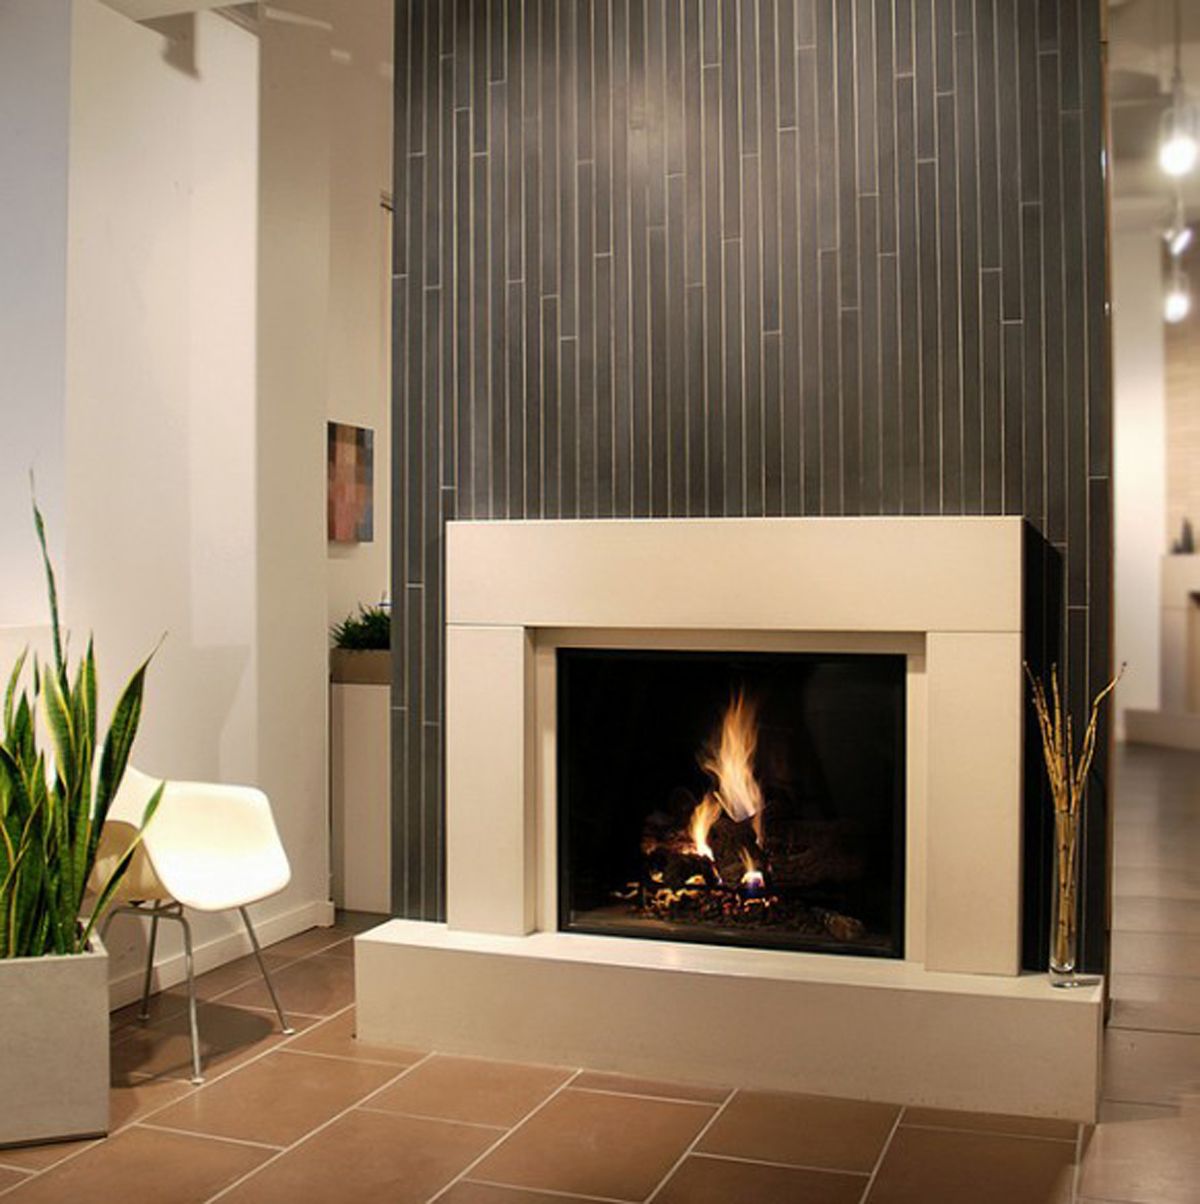 wallpaper around fireplace,hearth,fireplace,heat,wood burning stove,room